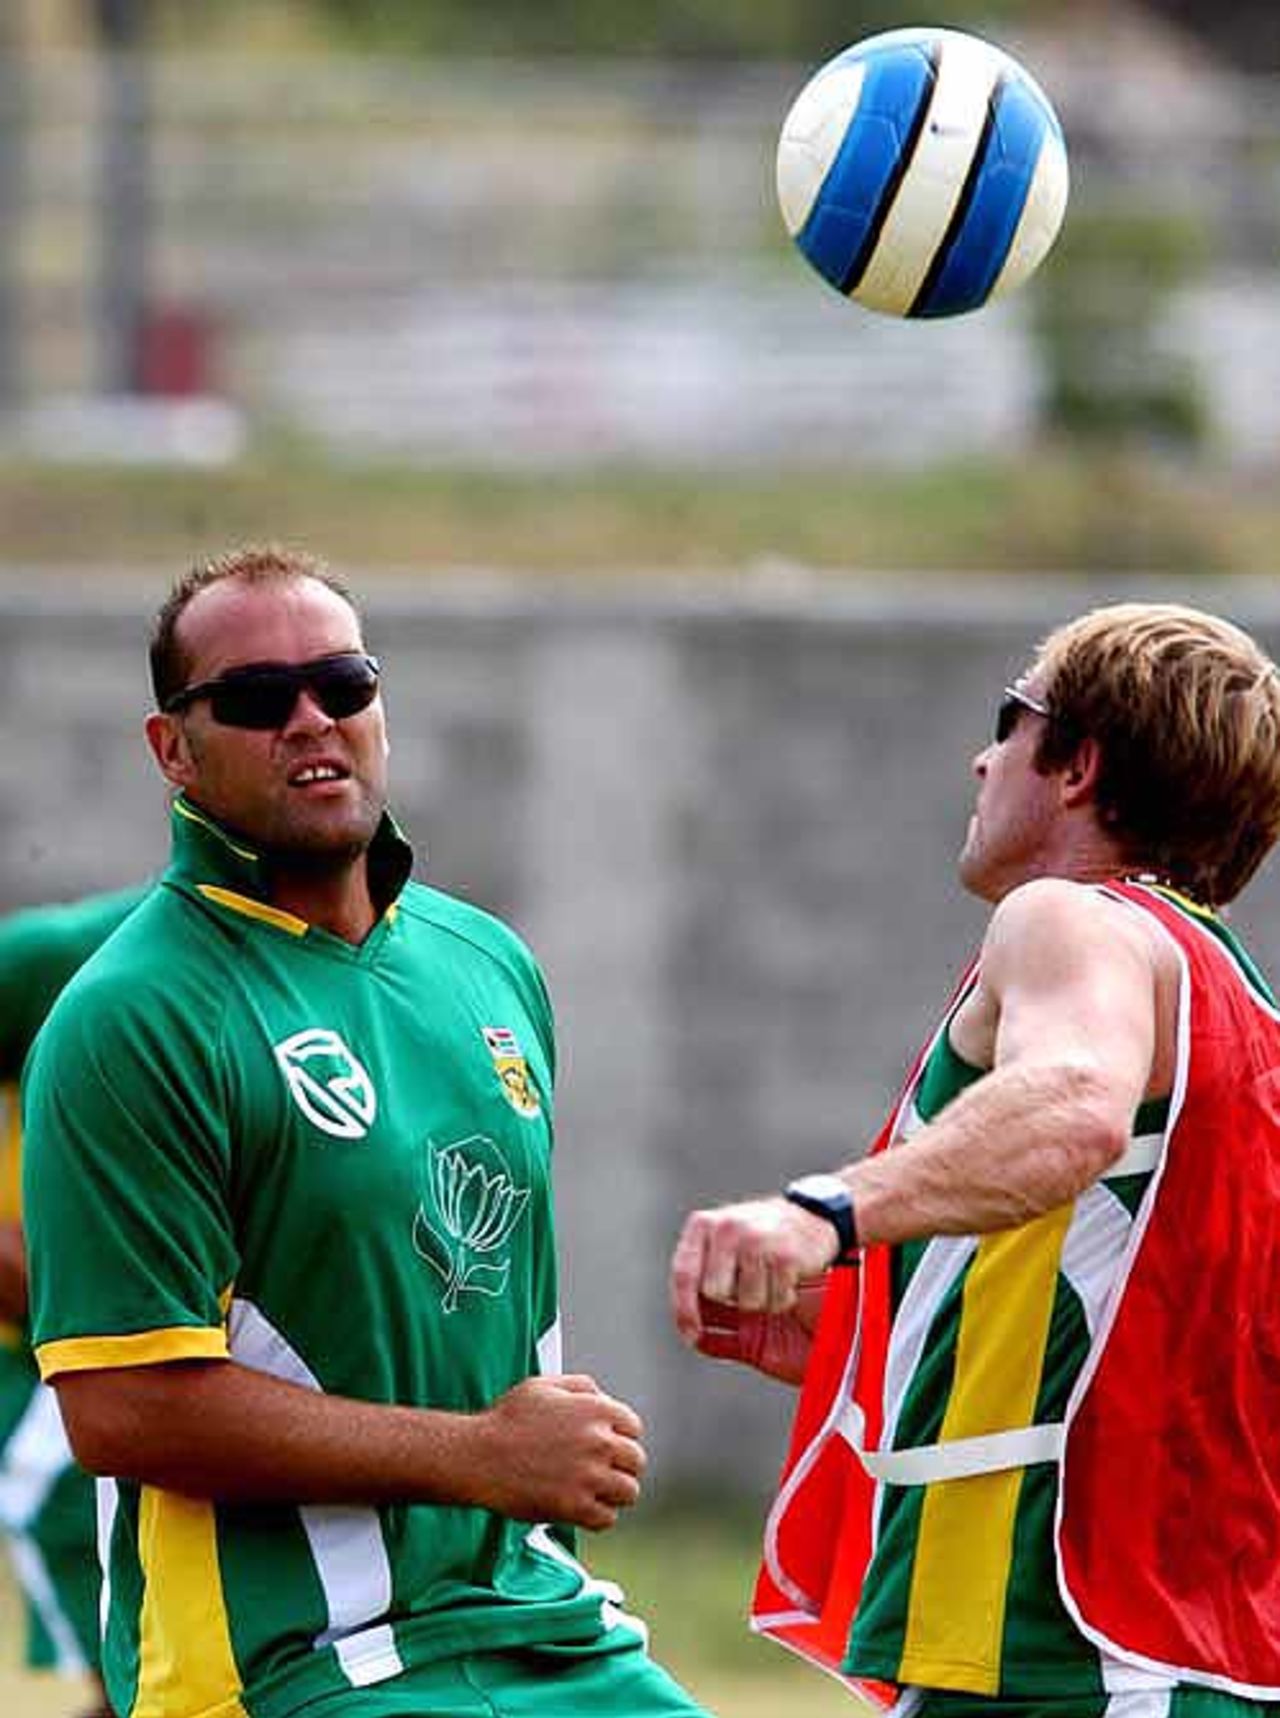 Jacques Kallis and Jonty Rhodes play around with a football, St Kitts, March 13, 2007